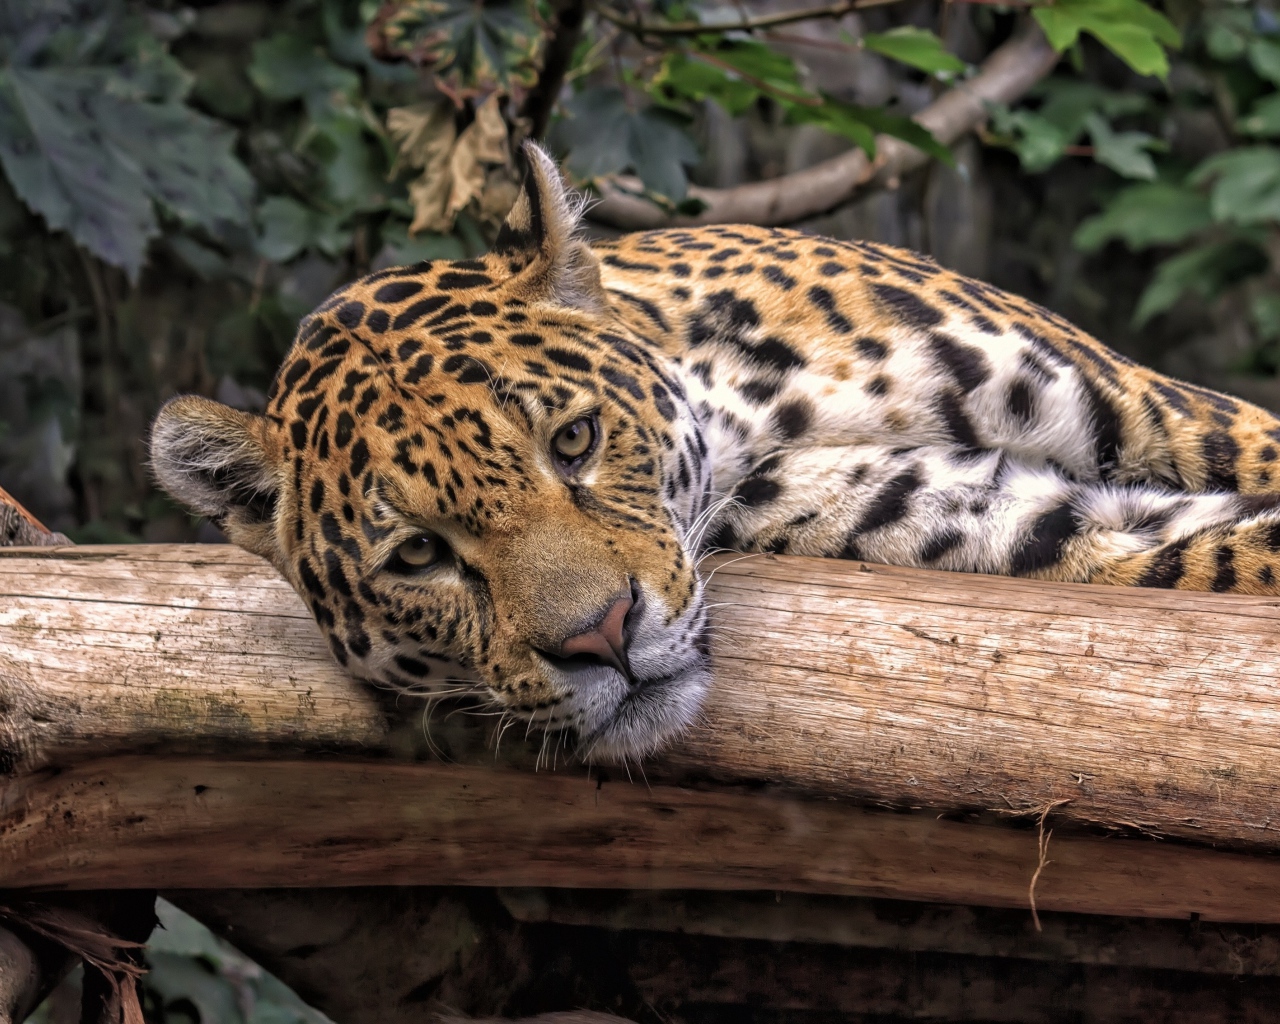 A large spotted jaguar lies on a dry tree.